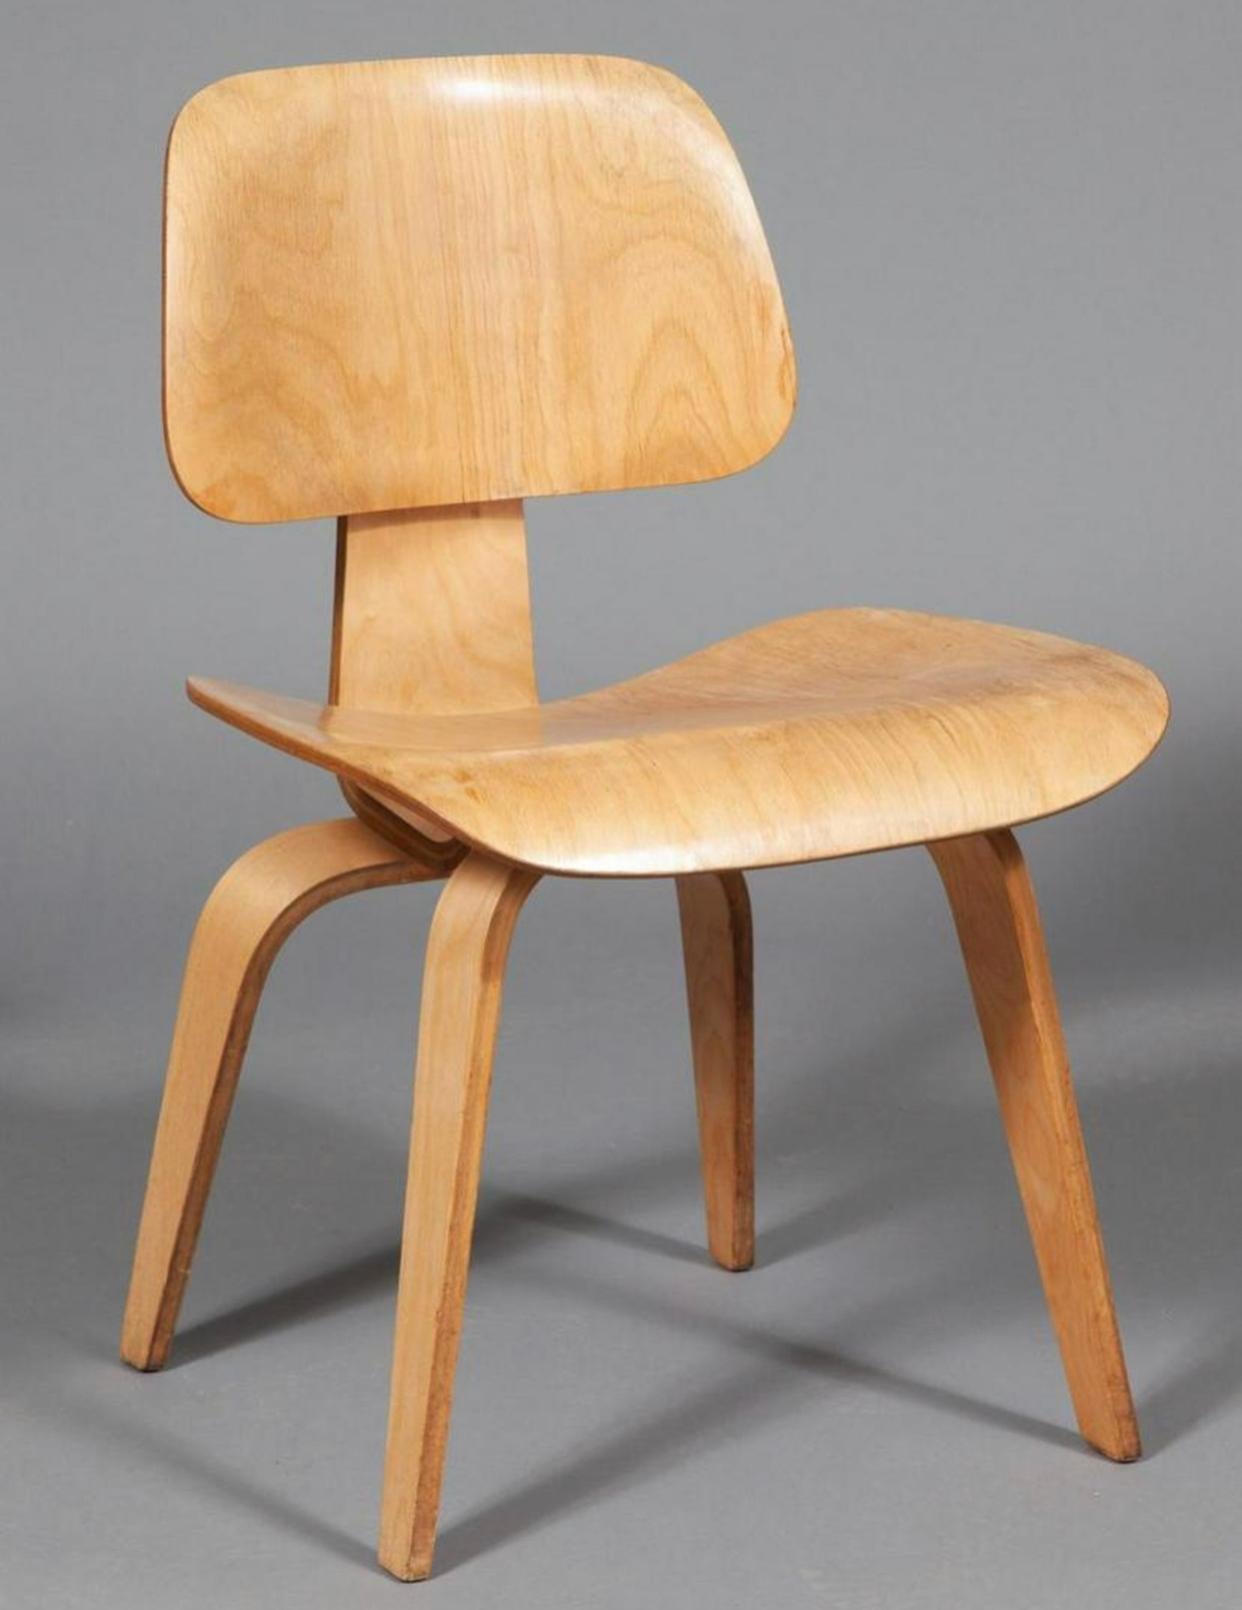 Rare set of four DCW dining chairs designed by Charles and Ray Eames and manufactured by Evans Products. These were produced in the 1940s before Herman Miller took over production. Molded laminated plywood components finished in birch. In good